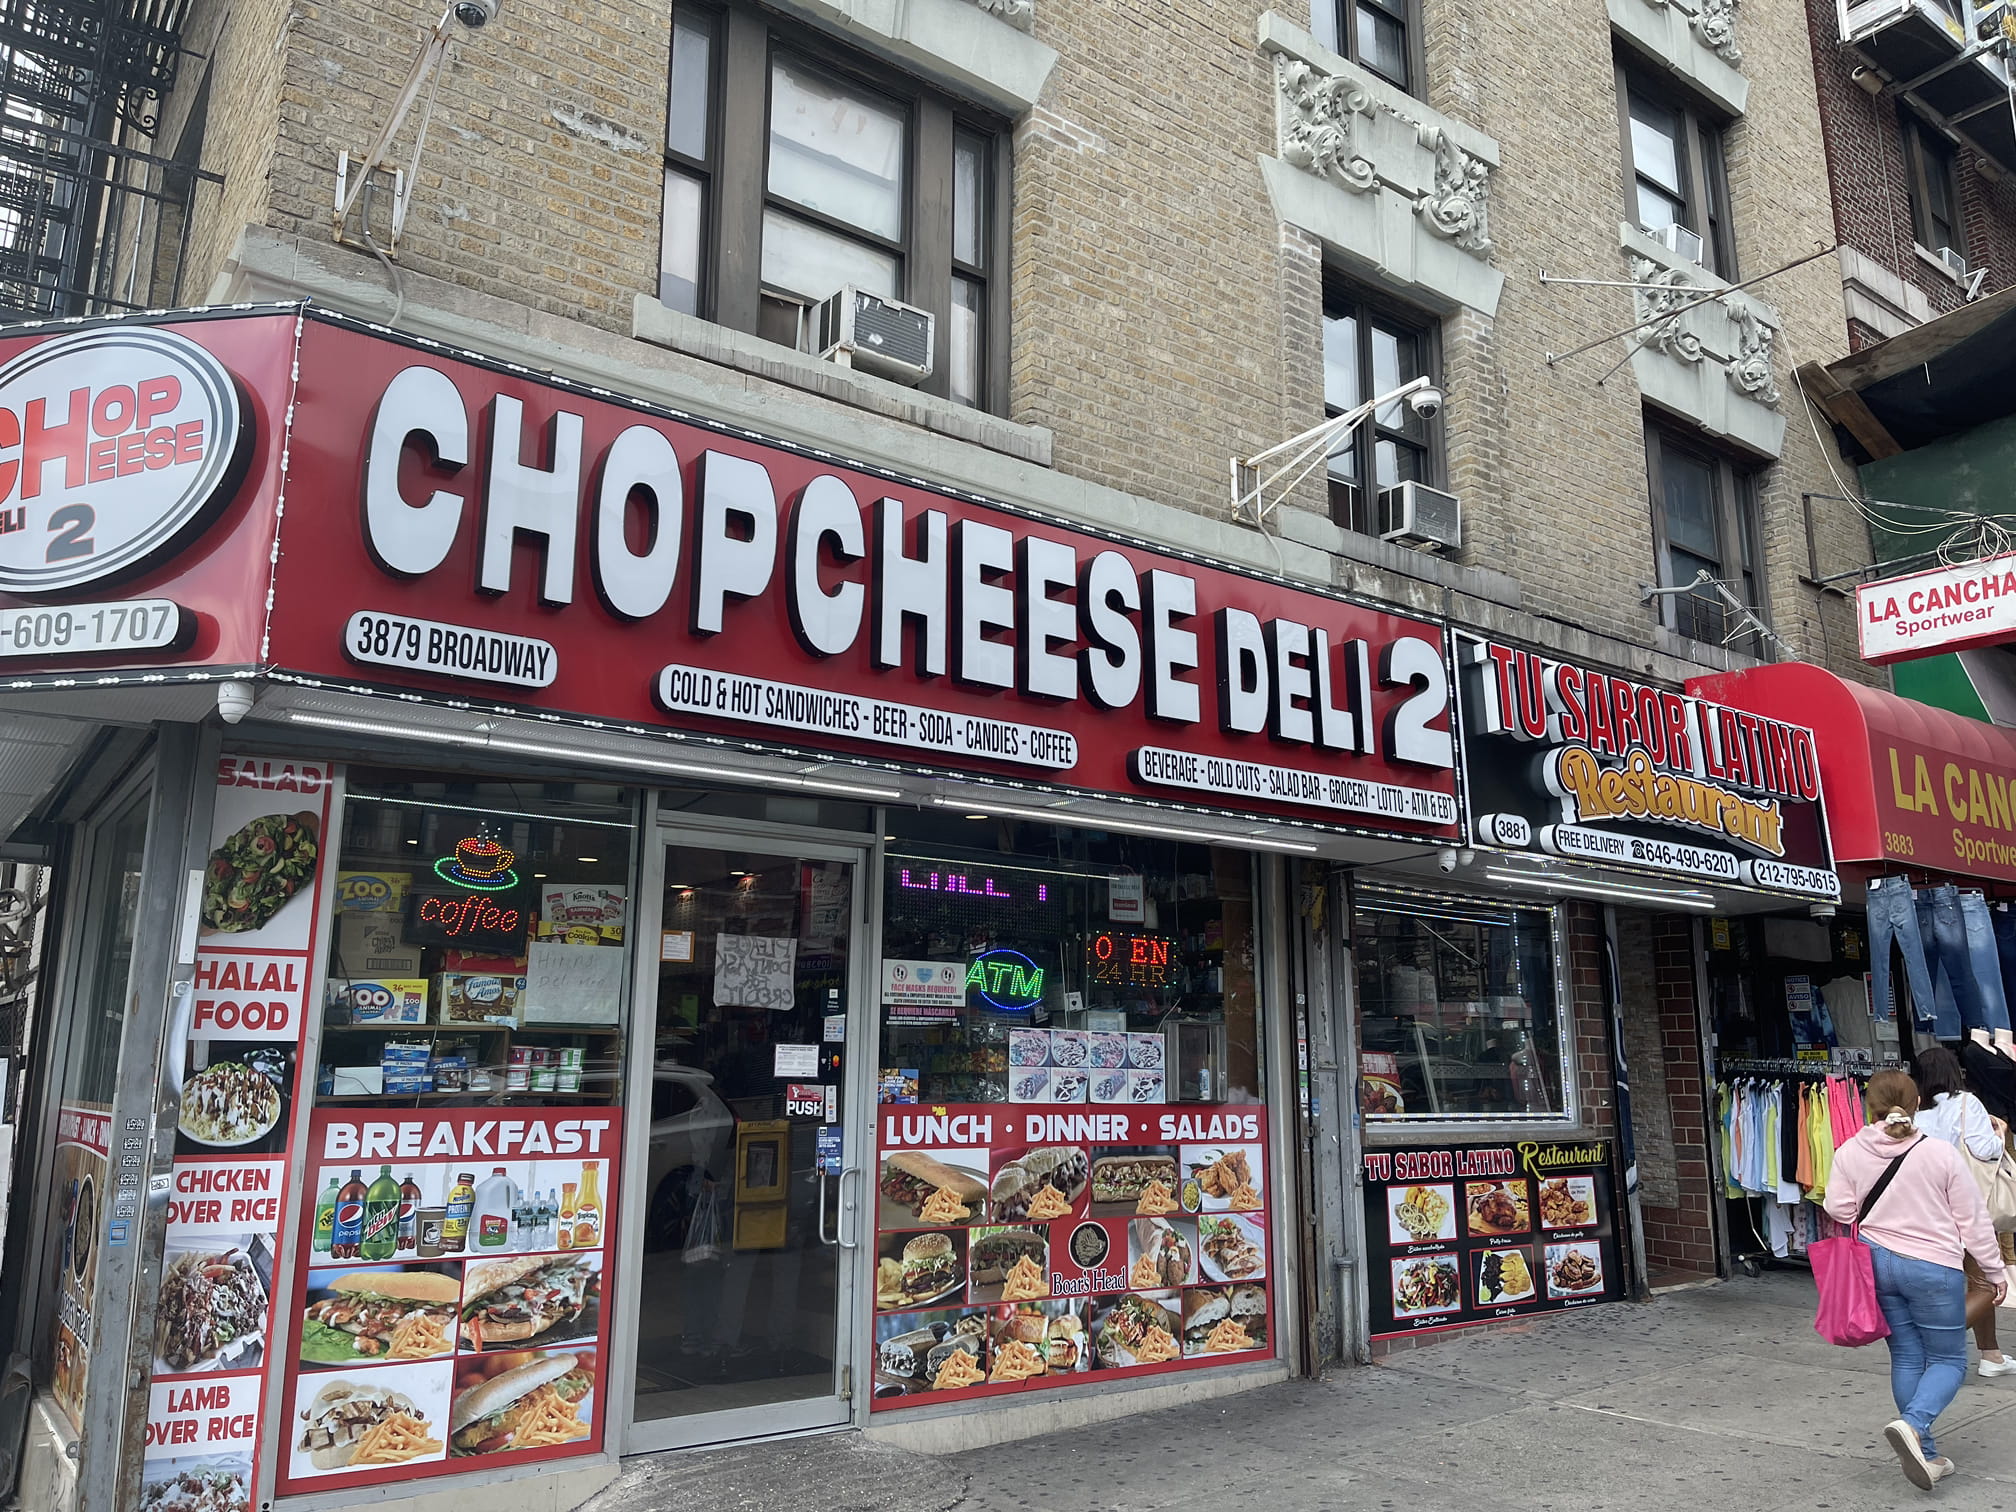 Lol chop cheese is hilarious - classic bodega sandwich. I like that the whole bodega was named after it. seen in Washington heights 